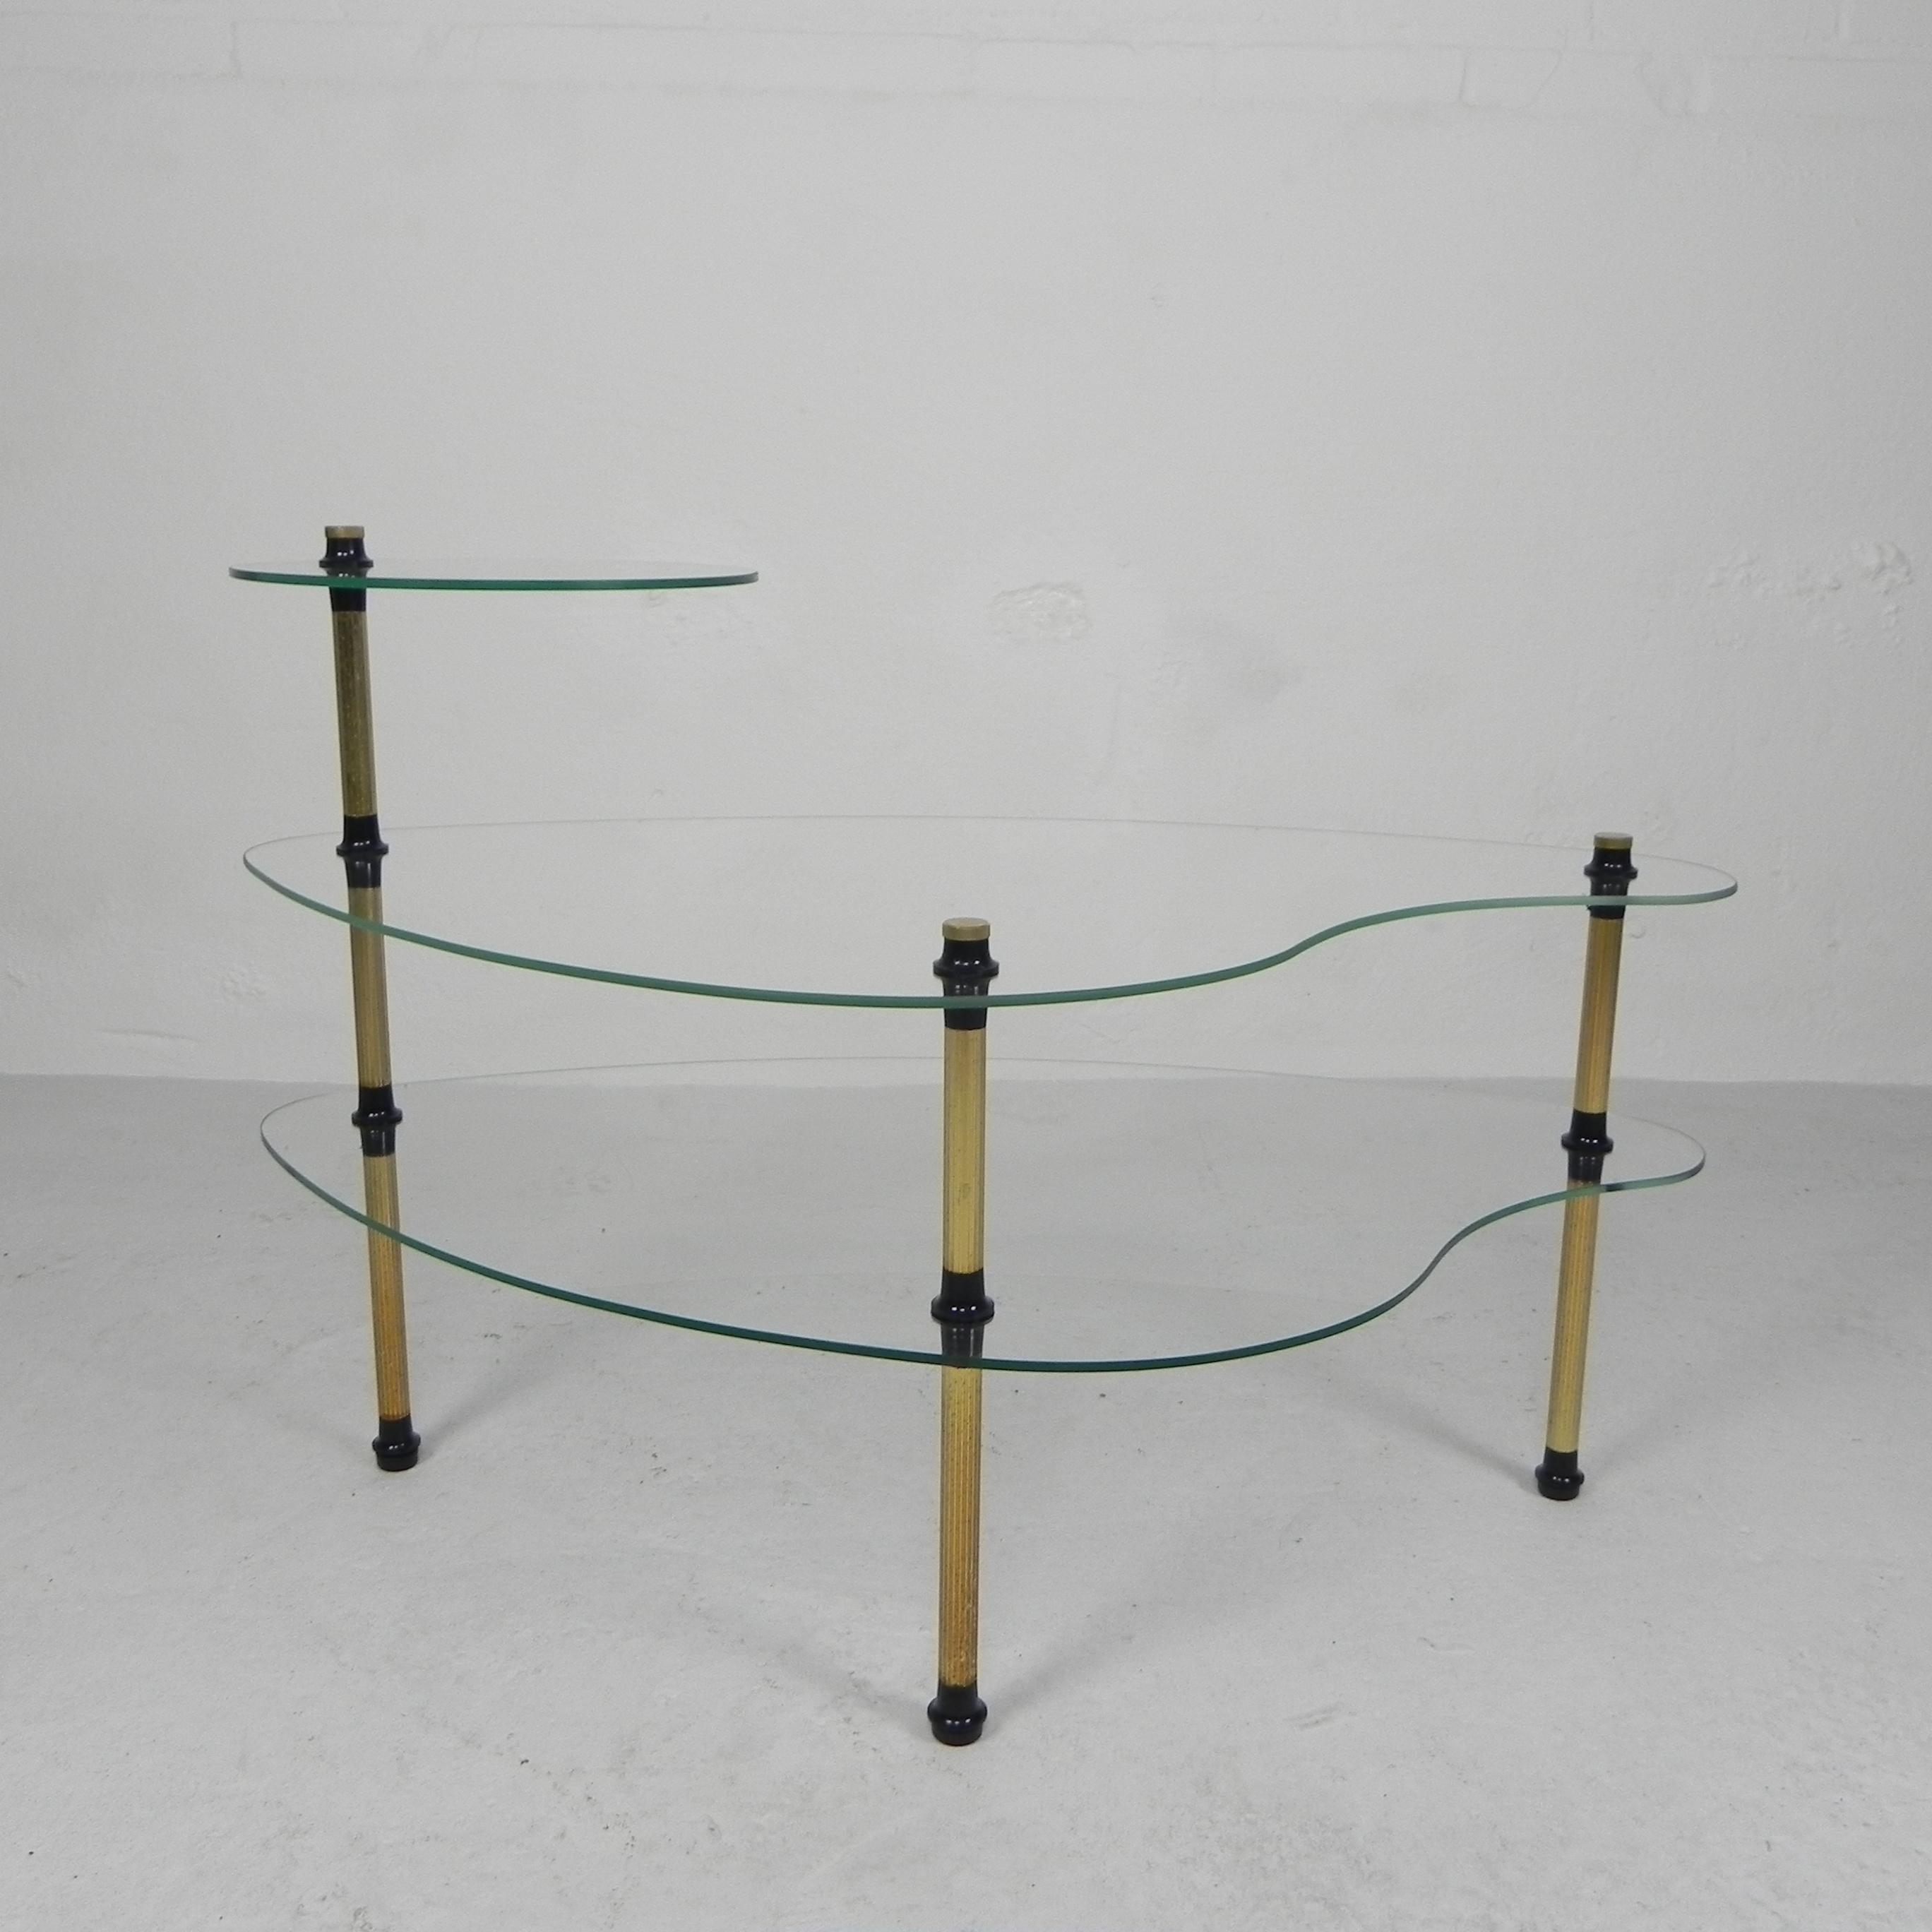 Three glass plates, 2 of which are kidney-shaped
and 1 round, resting on 3 legs.
The table can be dismantled completely.

Height: 54 cm.
Width: 080 cm.
Depth: 45 cm.
Origin: France, 1950s.
Material: glass / brass / plastic.